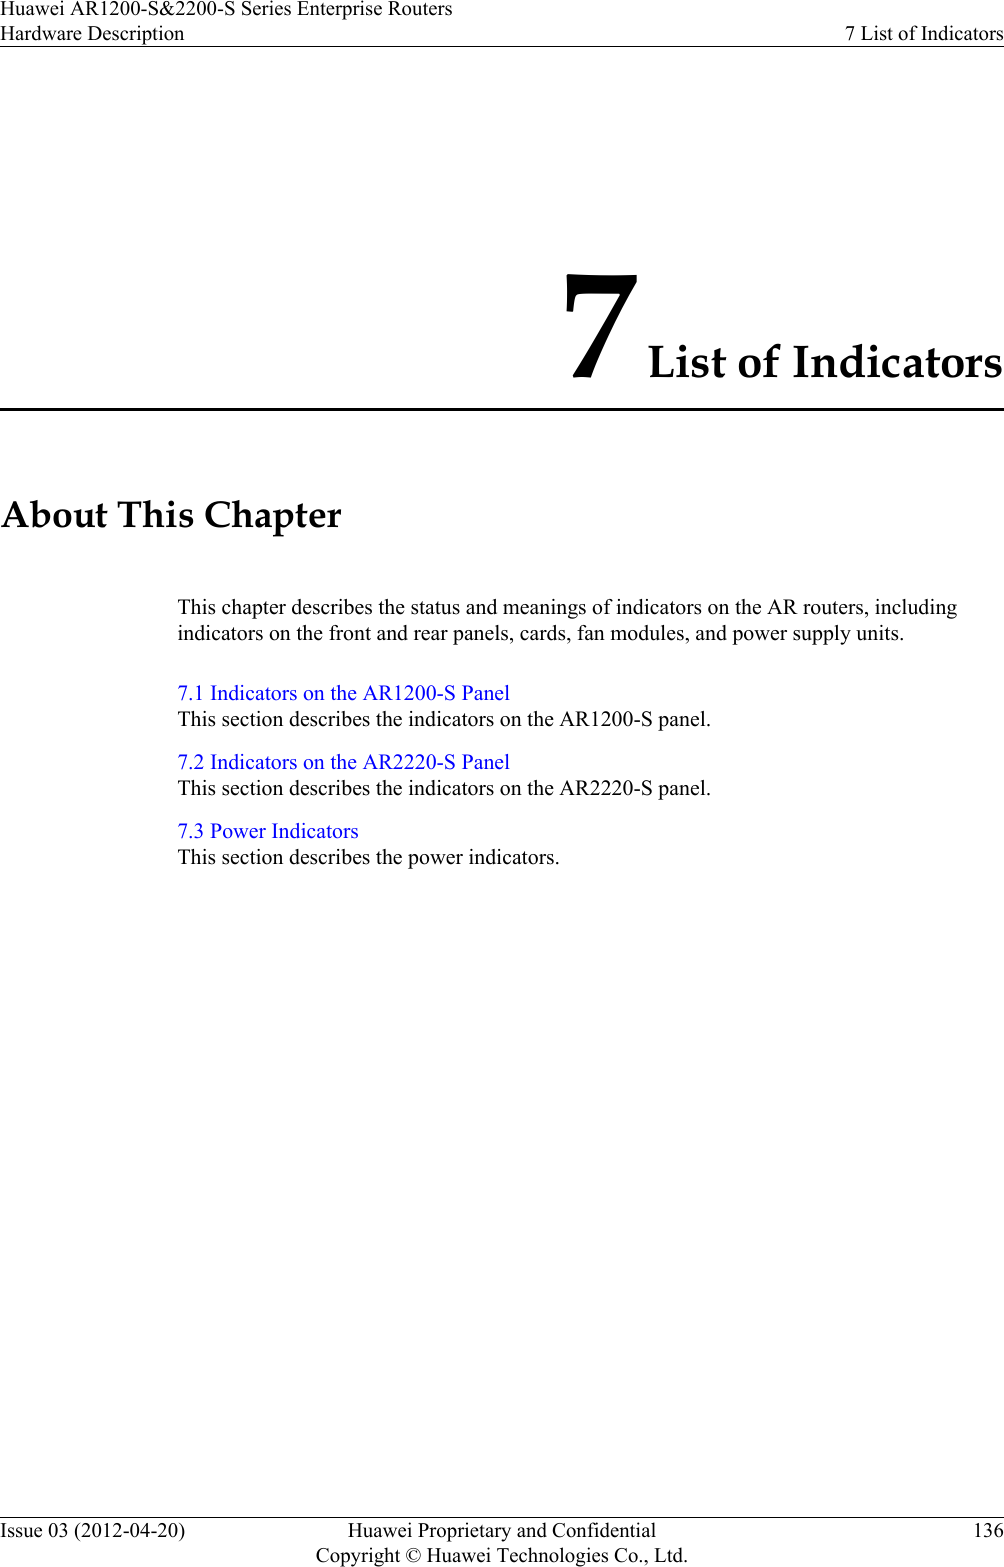 7 List of IndicatorsAbout This ChapterThis chapter describes the status and meanings of indicators on the AR routers, includingindicators on the front and rear panels, cards, fan modules, and power supply units.7.1 Indicators on the AR1200-S PanelThis section describes the indicators on the AR1200-S panel.7.2 Indicators on the AR2220-S PanelThis section describes the indicators on the AR2220-S panel.7.3 Power IndicatorsThis section describes the power indicators.Huawei AR1200-S&amp;2200-S Series Enterprise RoutersHardware Description 7 List of IndicatorsIssue 03 (2012-04-20) Huawei Proprietary and ConfidentialCopyright © Huawei Technologies Co., Ltd.136